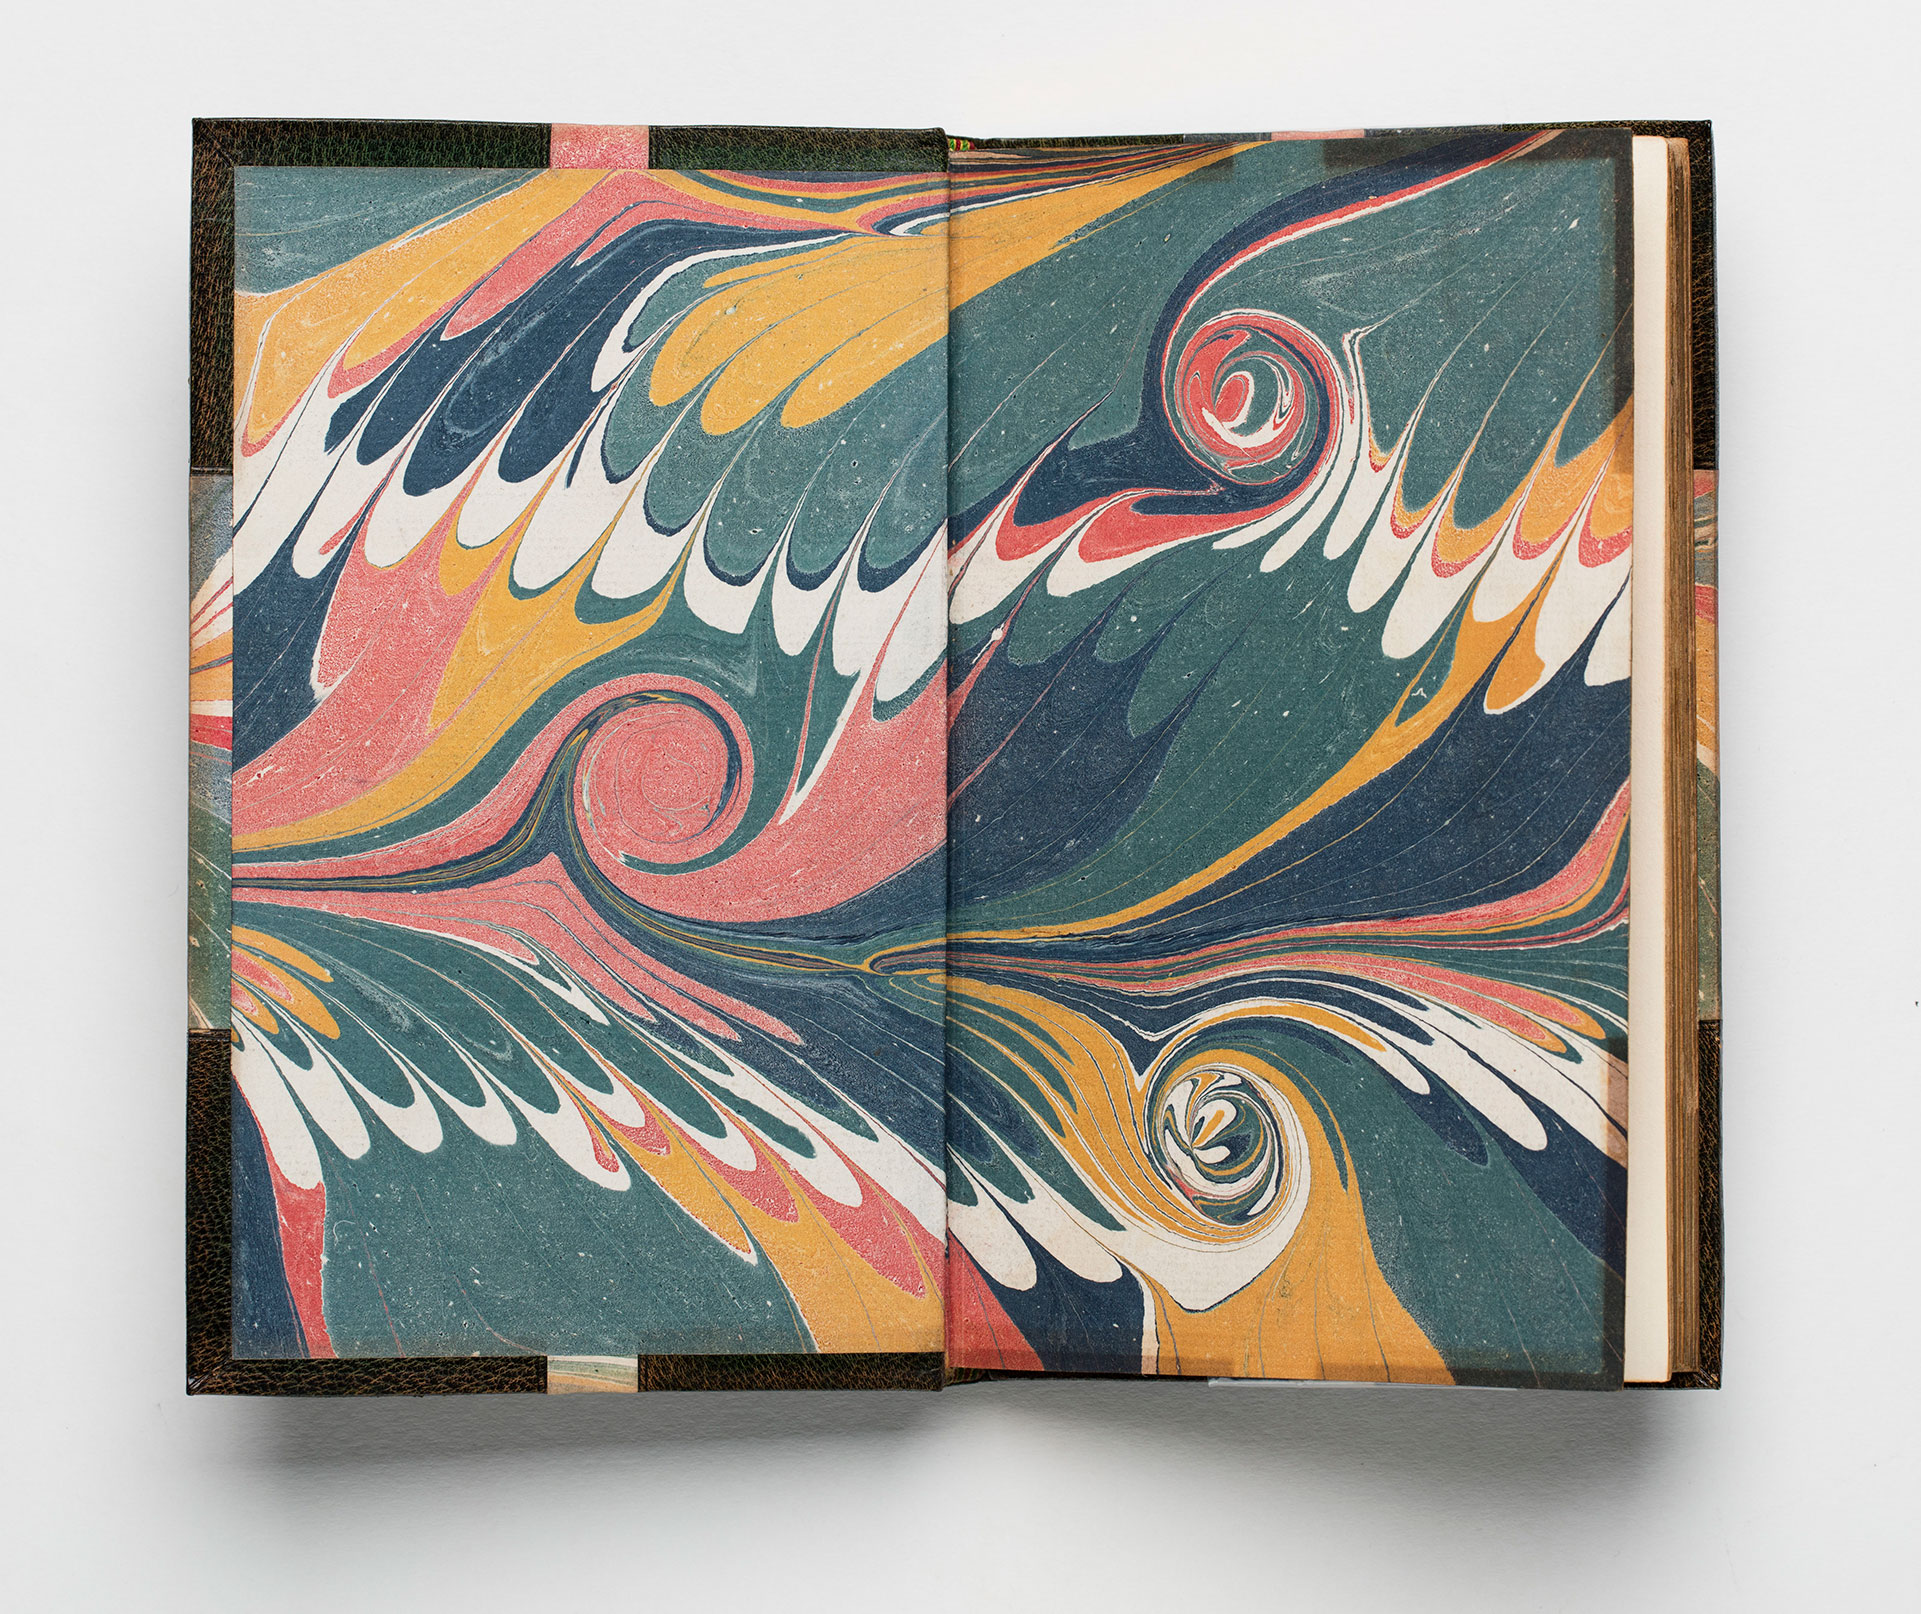 Endpaper with a colourful marbled pattern.